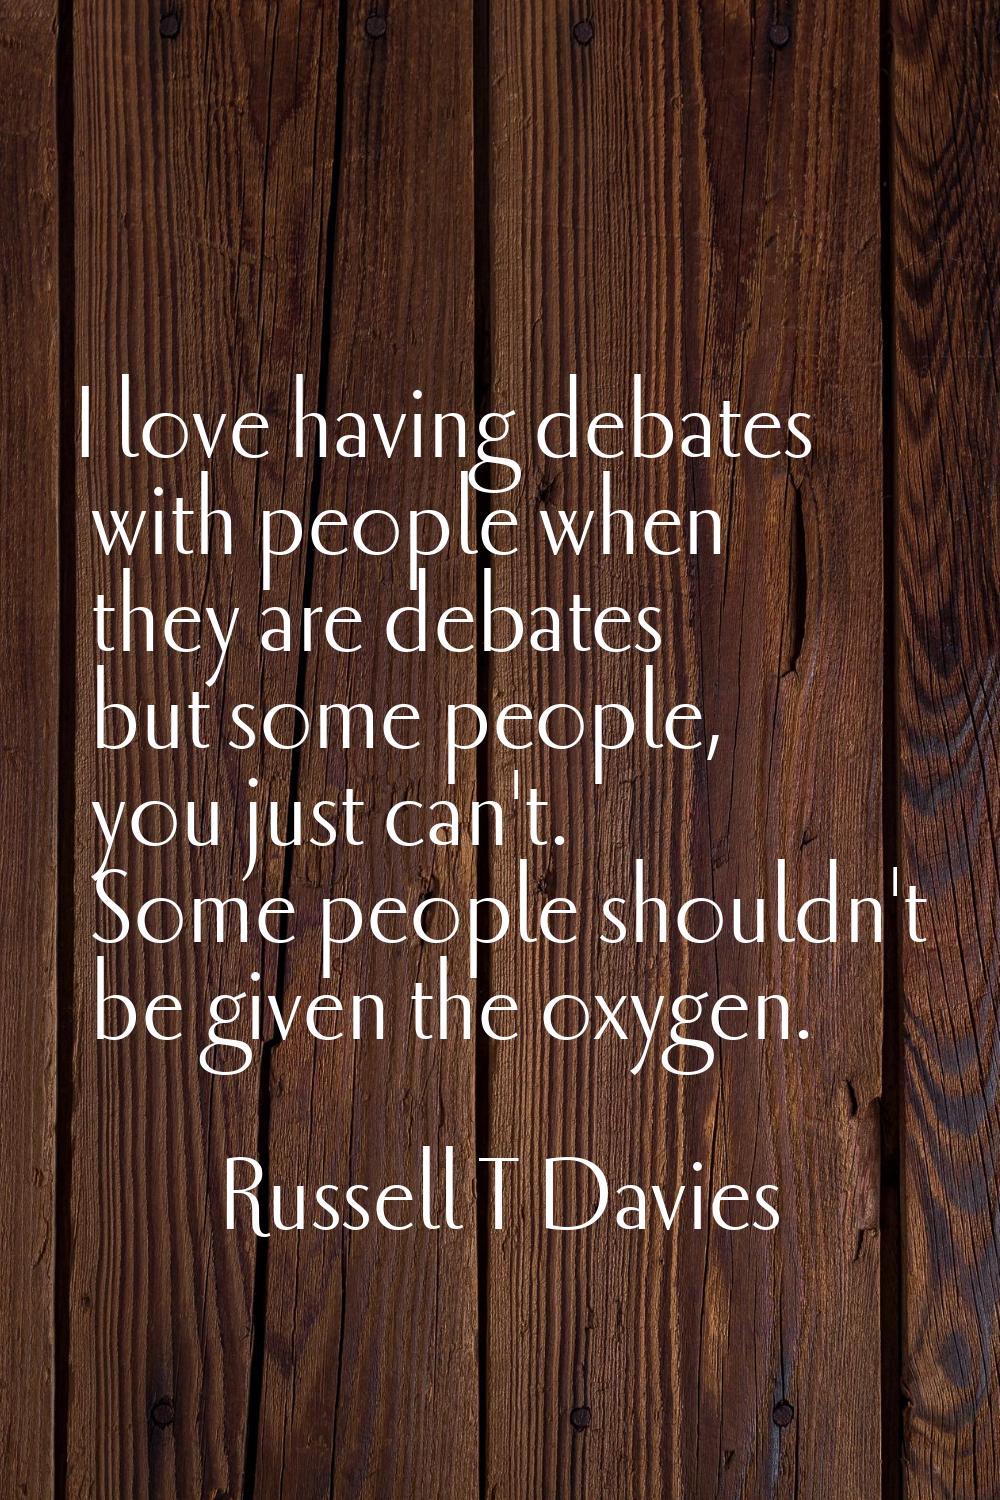 I love having debates with people when they are debates but some people, you just can't. Some peopl